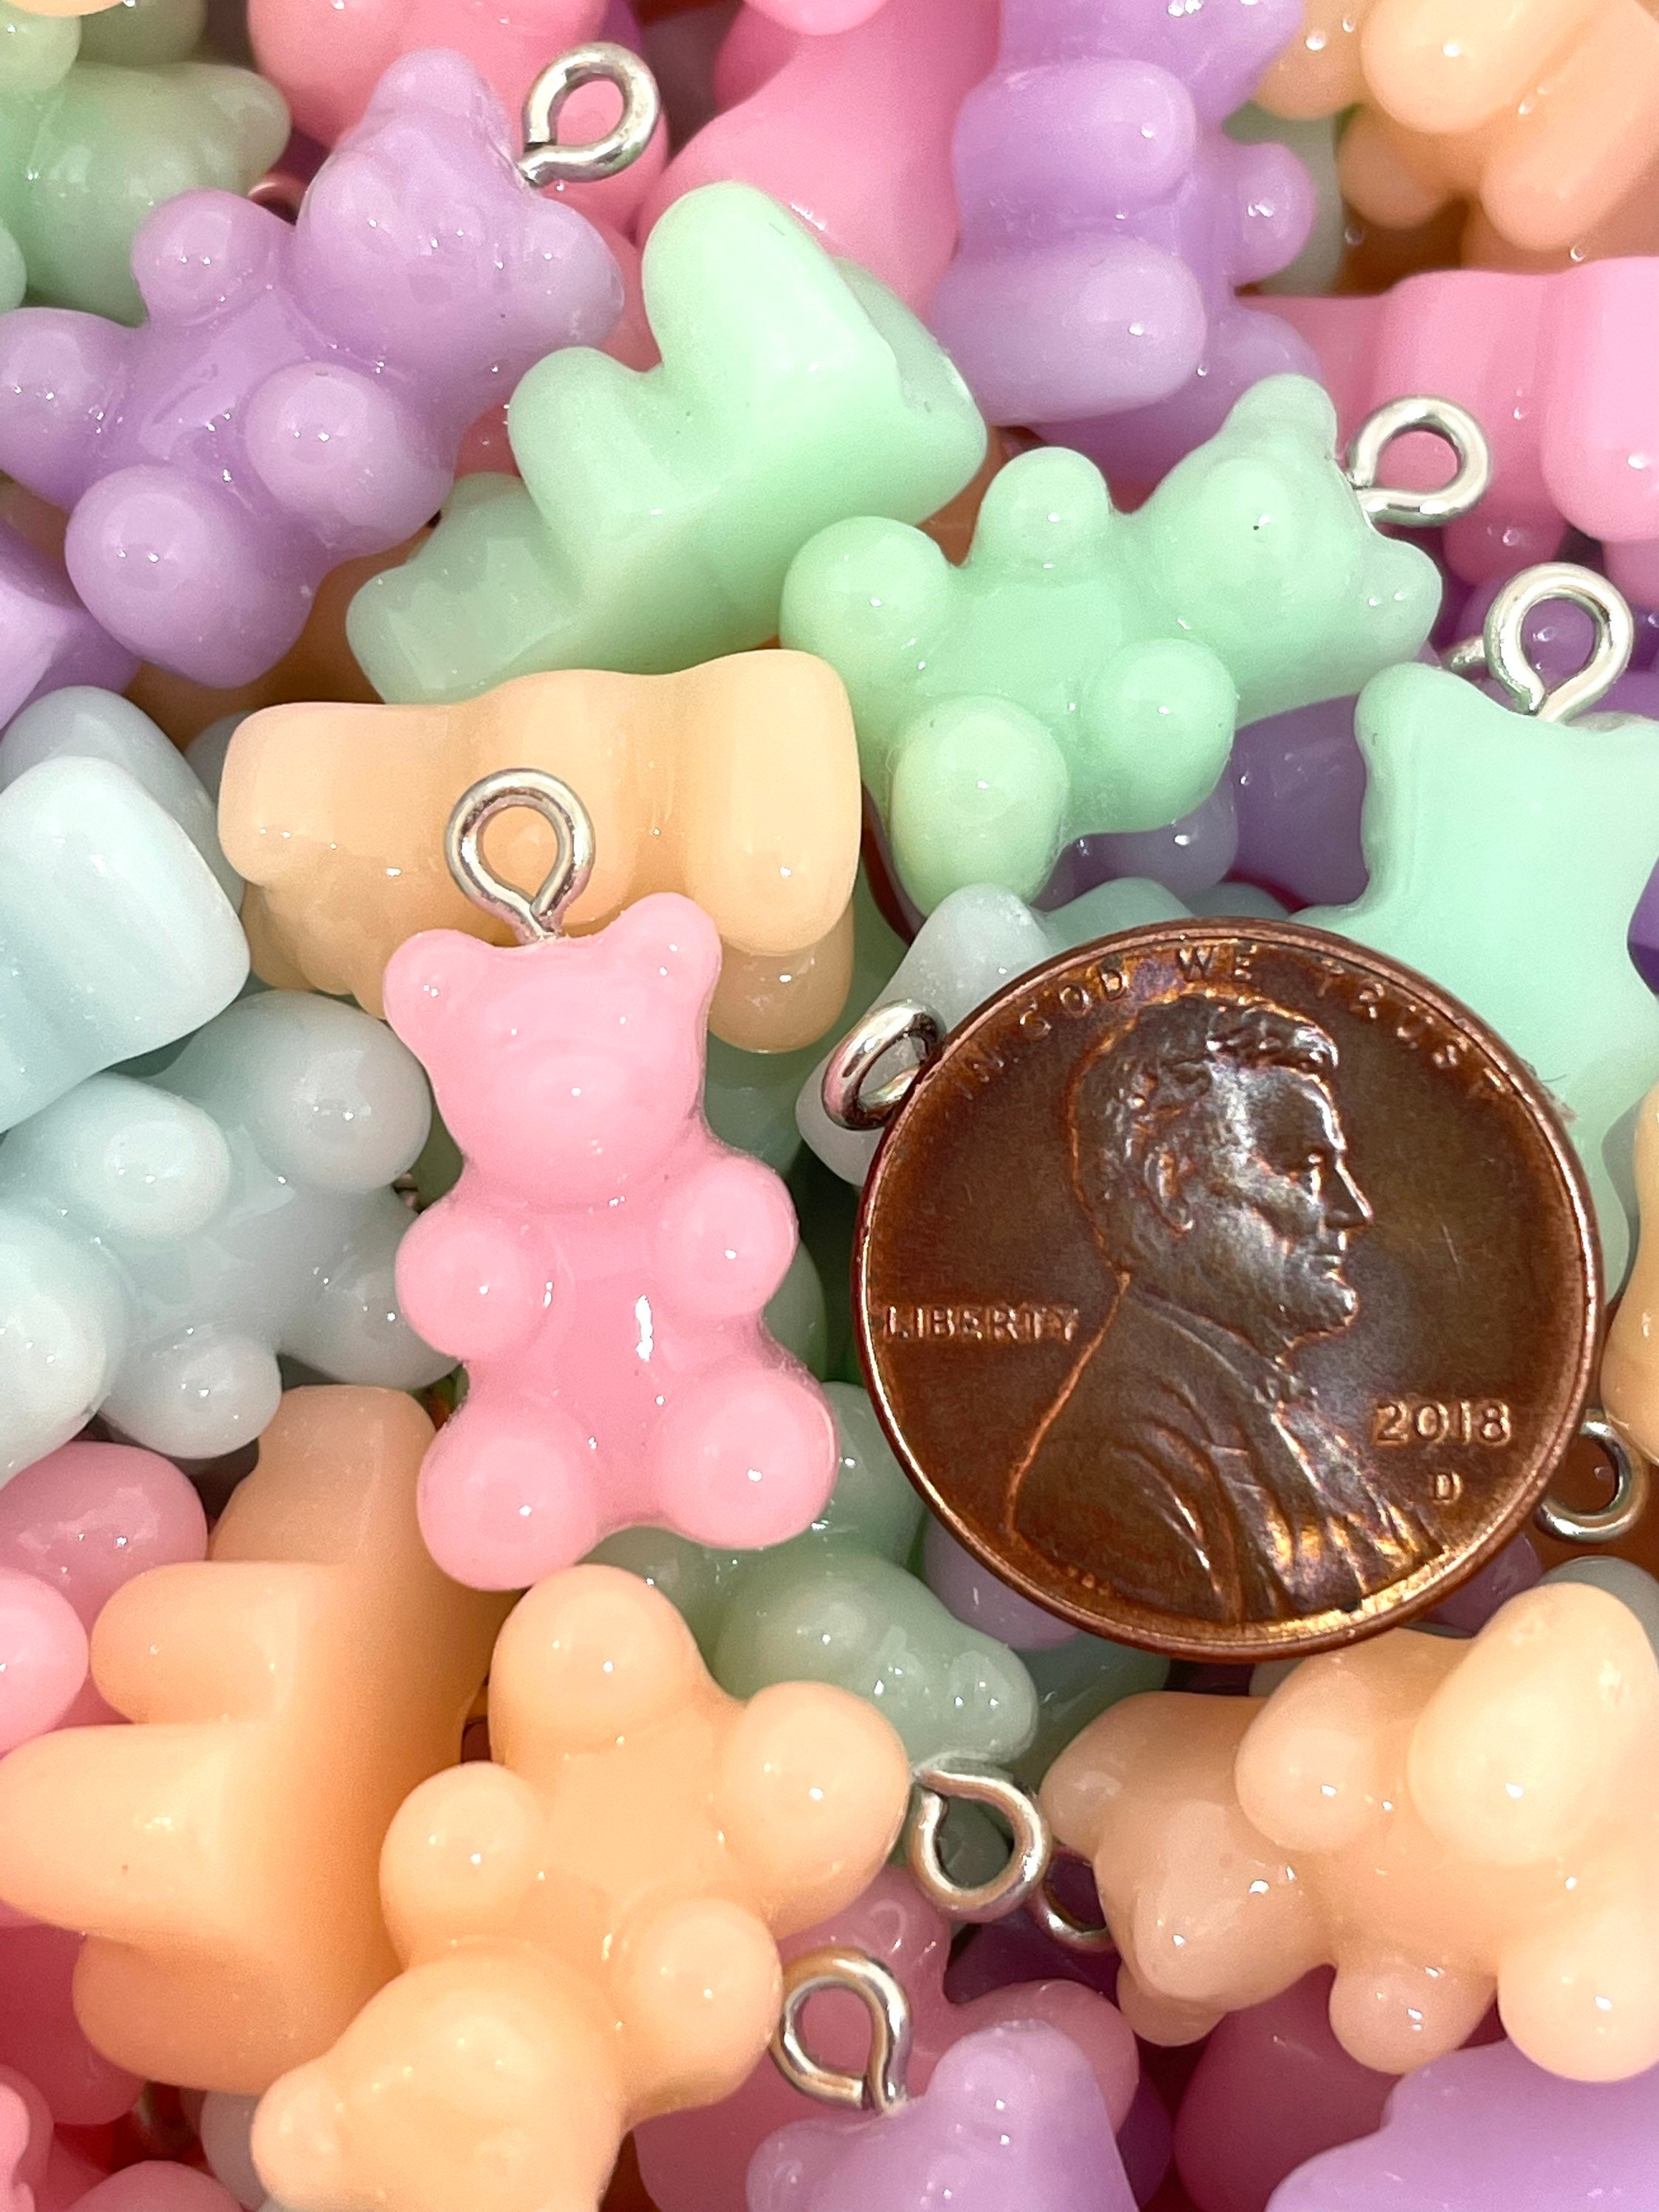 Gummy Bear Charms by Creatology™, 4ct.